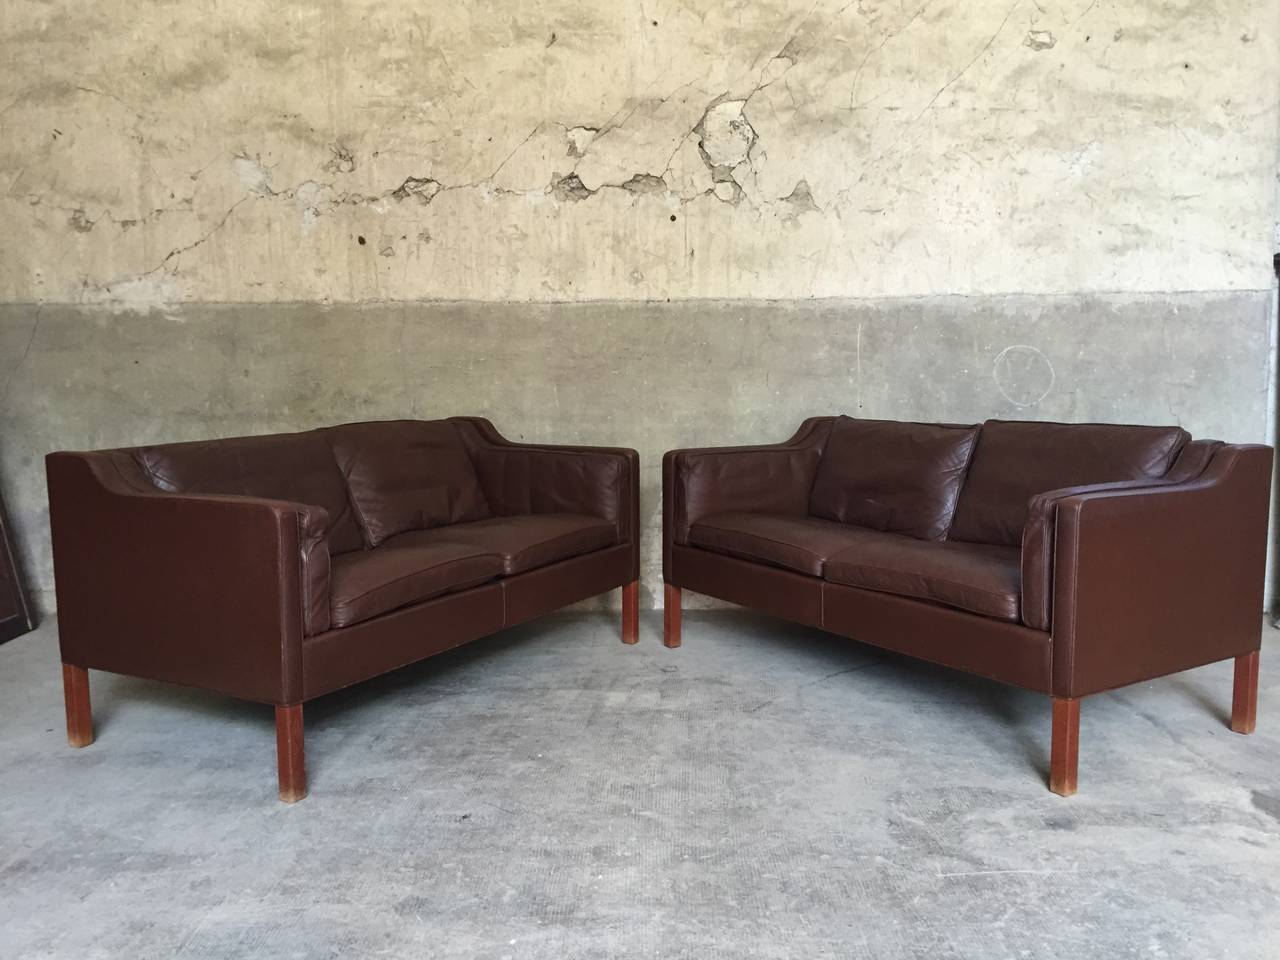 the classic 2 seat sofa designed by Borge Mogensen for Fredericia, Denmark model 2212. Unsurpassed quality and in beautiful patinated chocolate brown leather with solid teak legs. Circa 1970
one piece available

Dim each = Hback 76 / Hseat 49 x